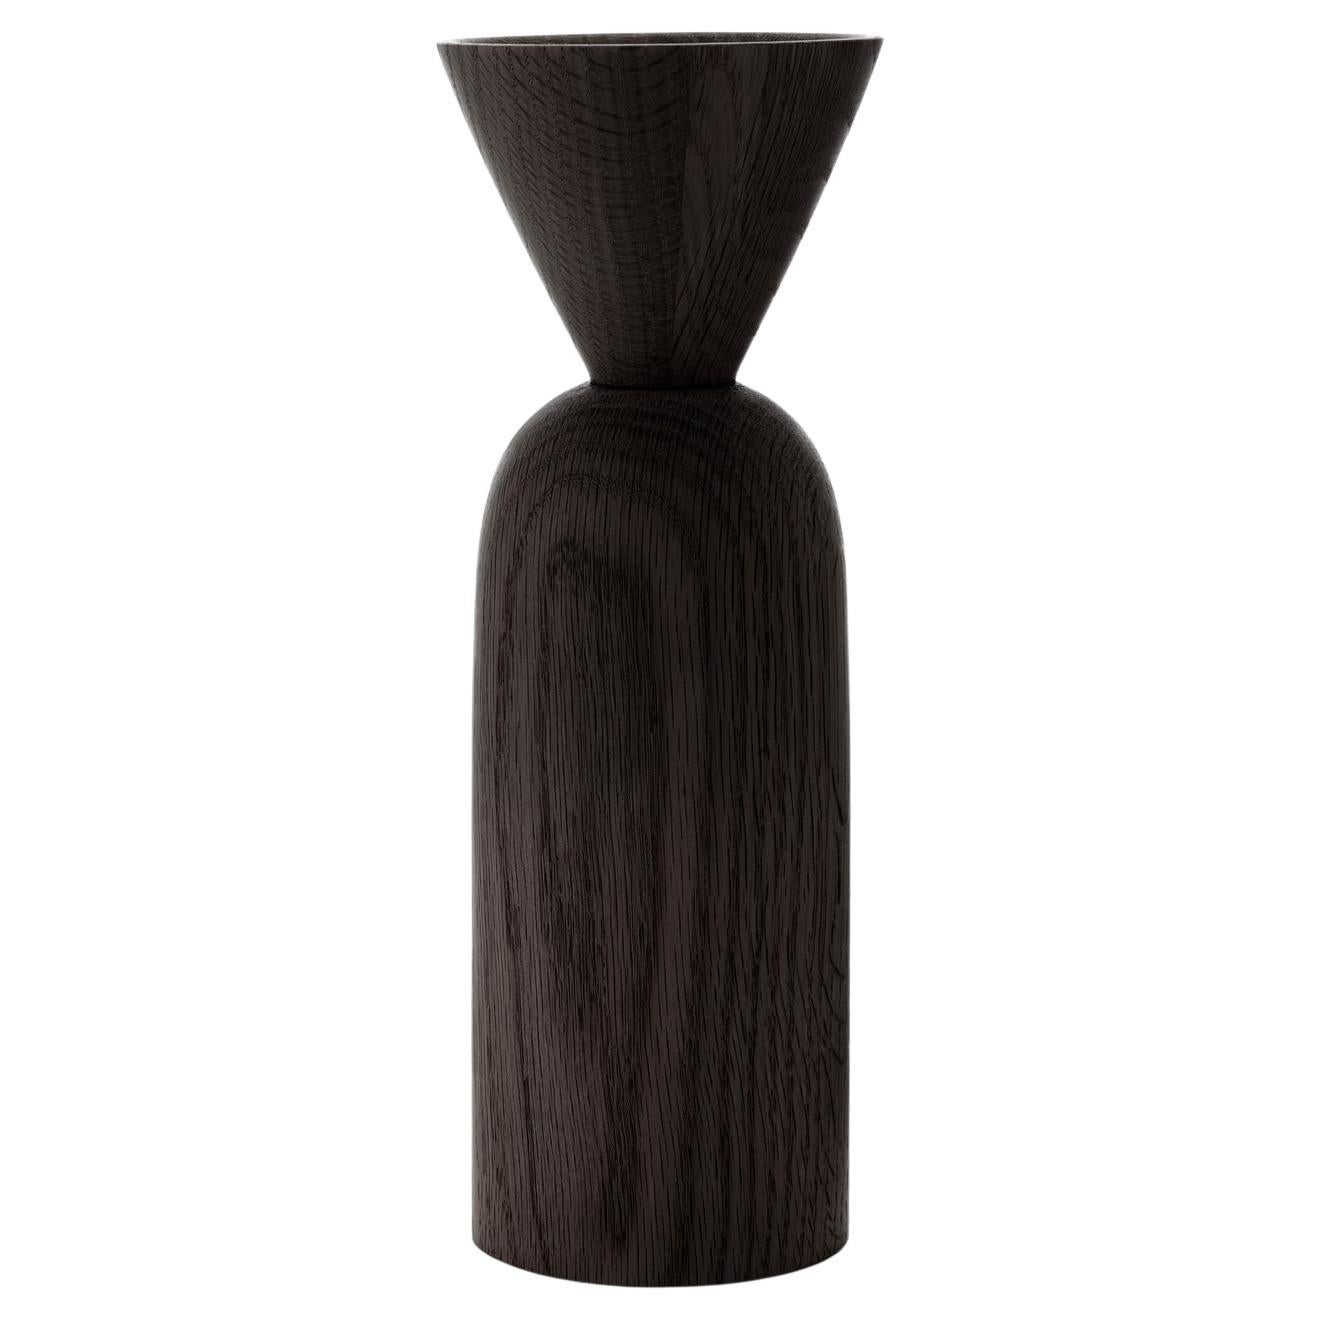 Cone Shape Black Stained Oak Vase by Applicata For Sale